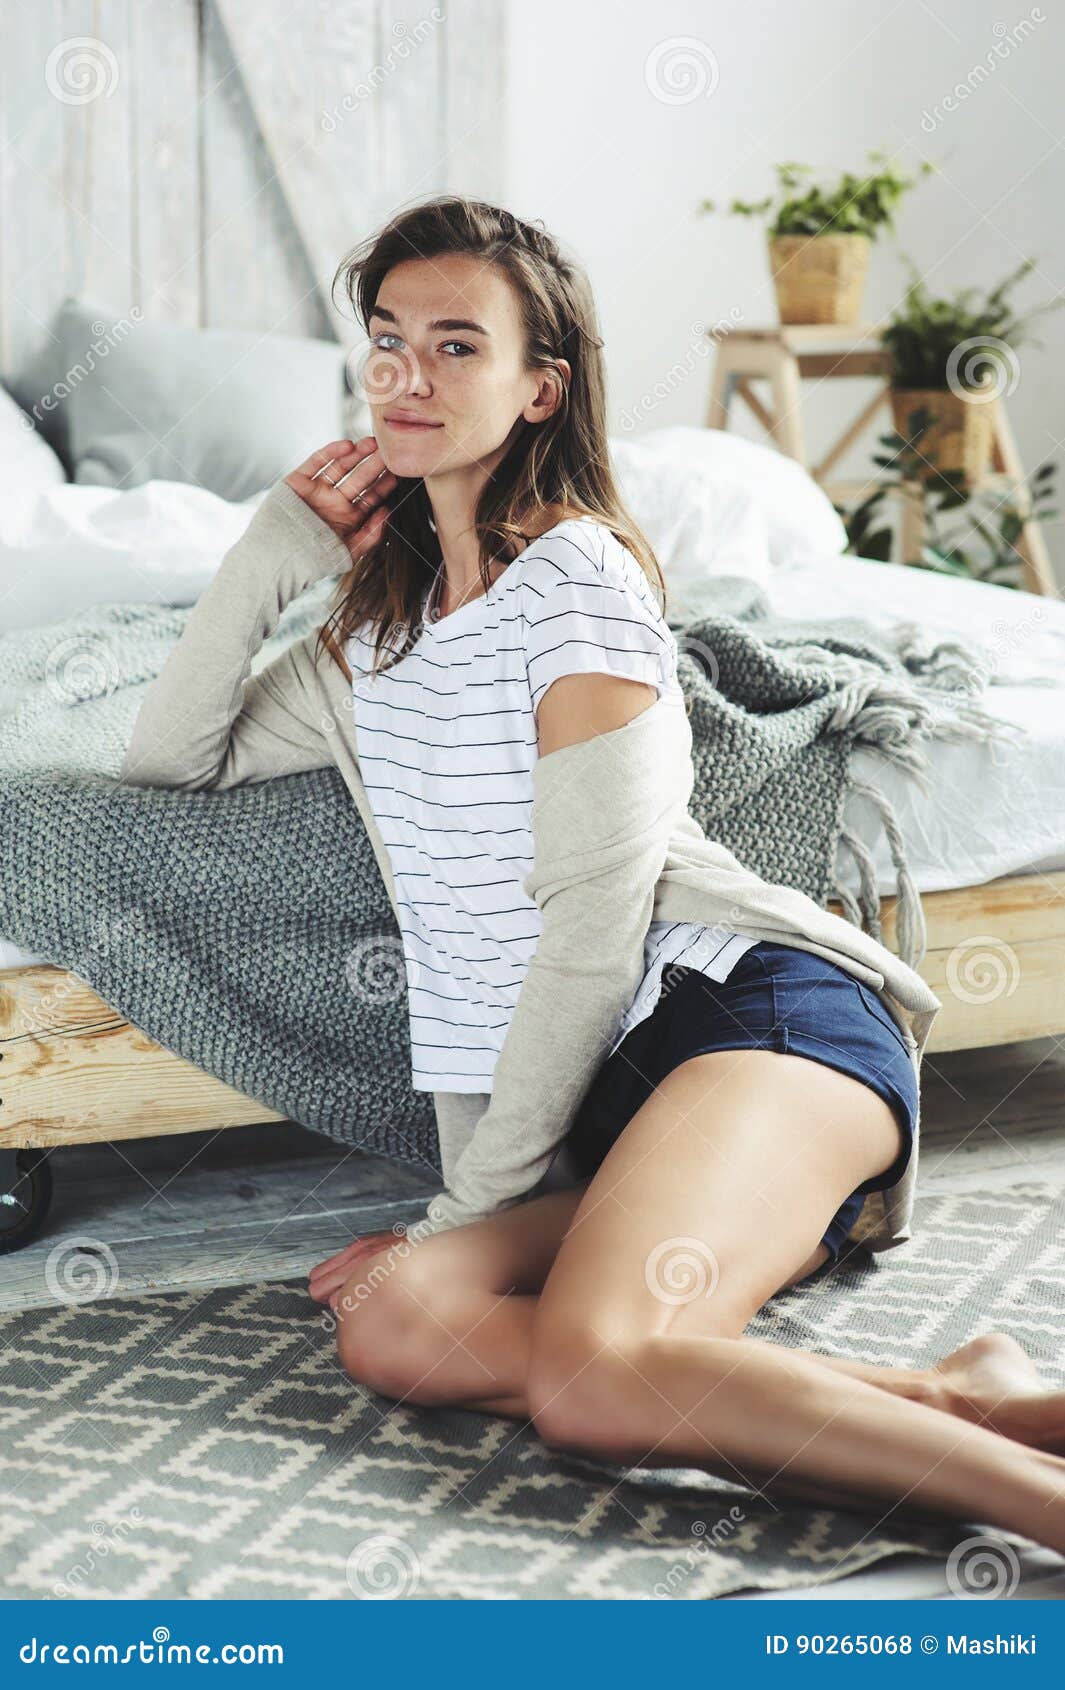 Beautiful Young Feminine Woman Relaxing in Bedroom in Lazy Weekend ...